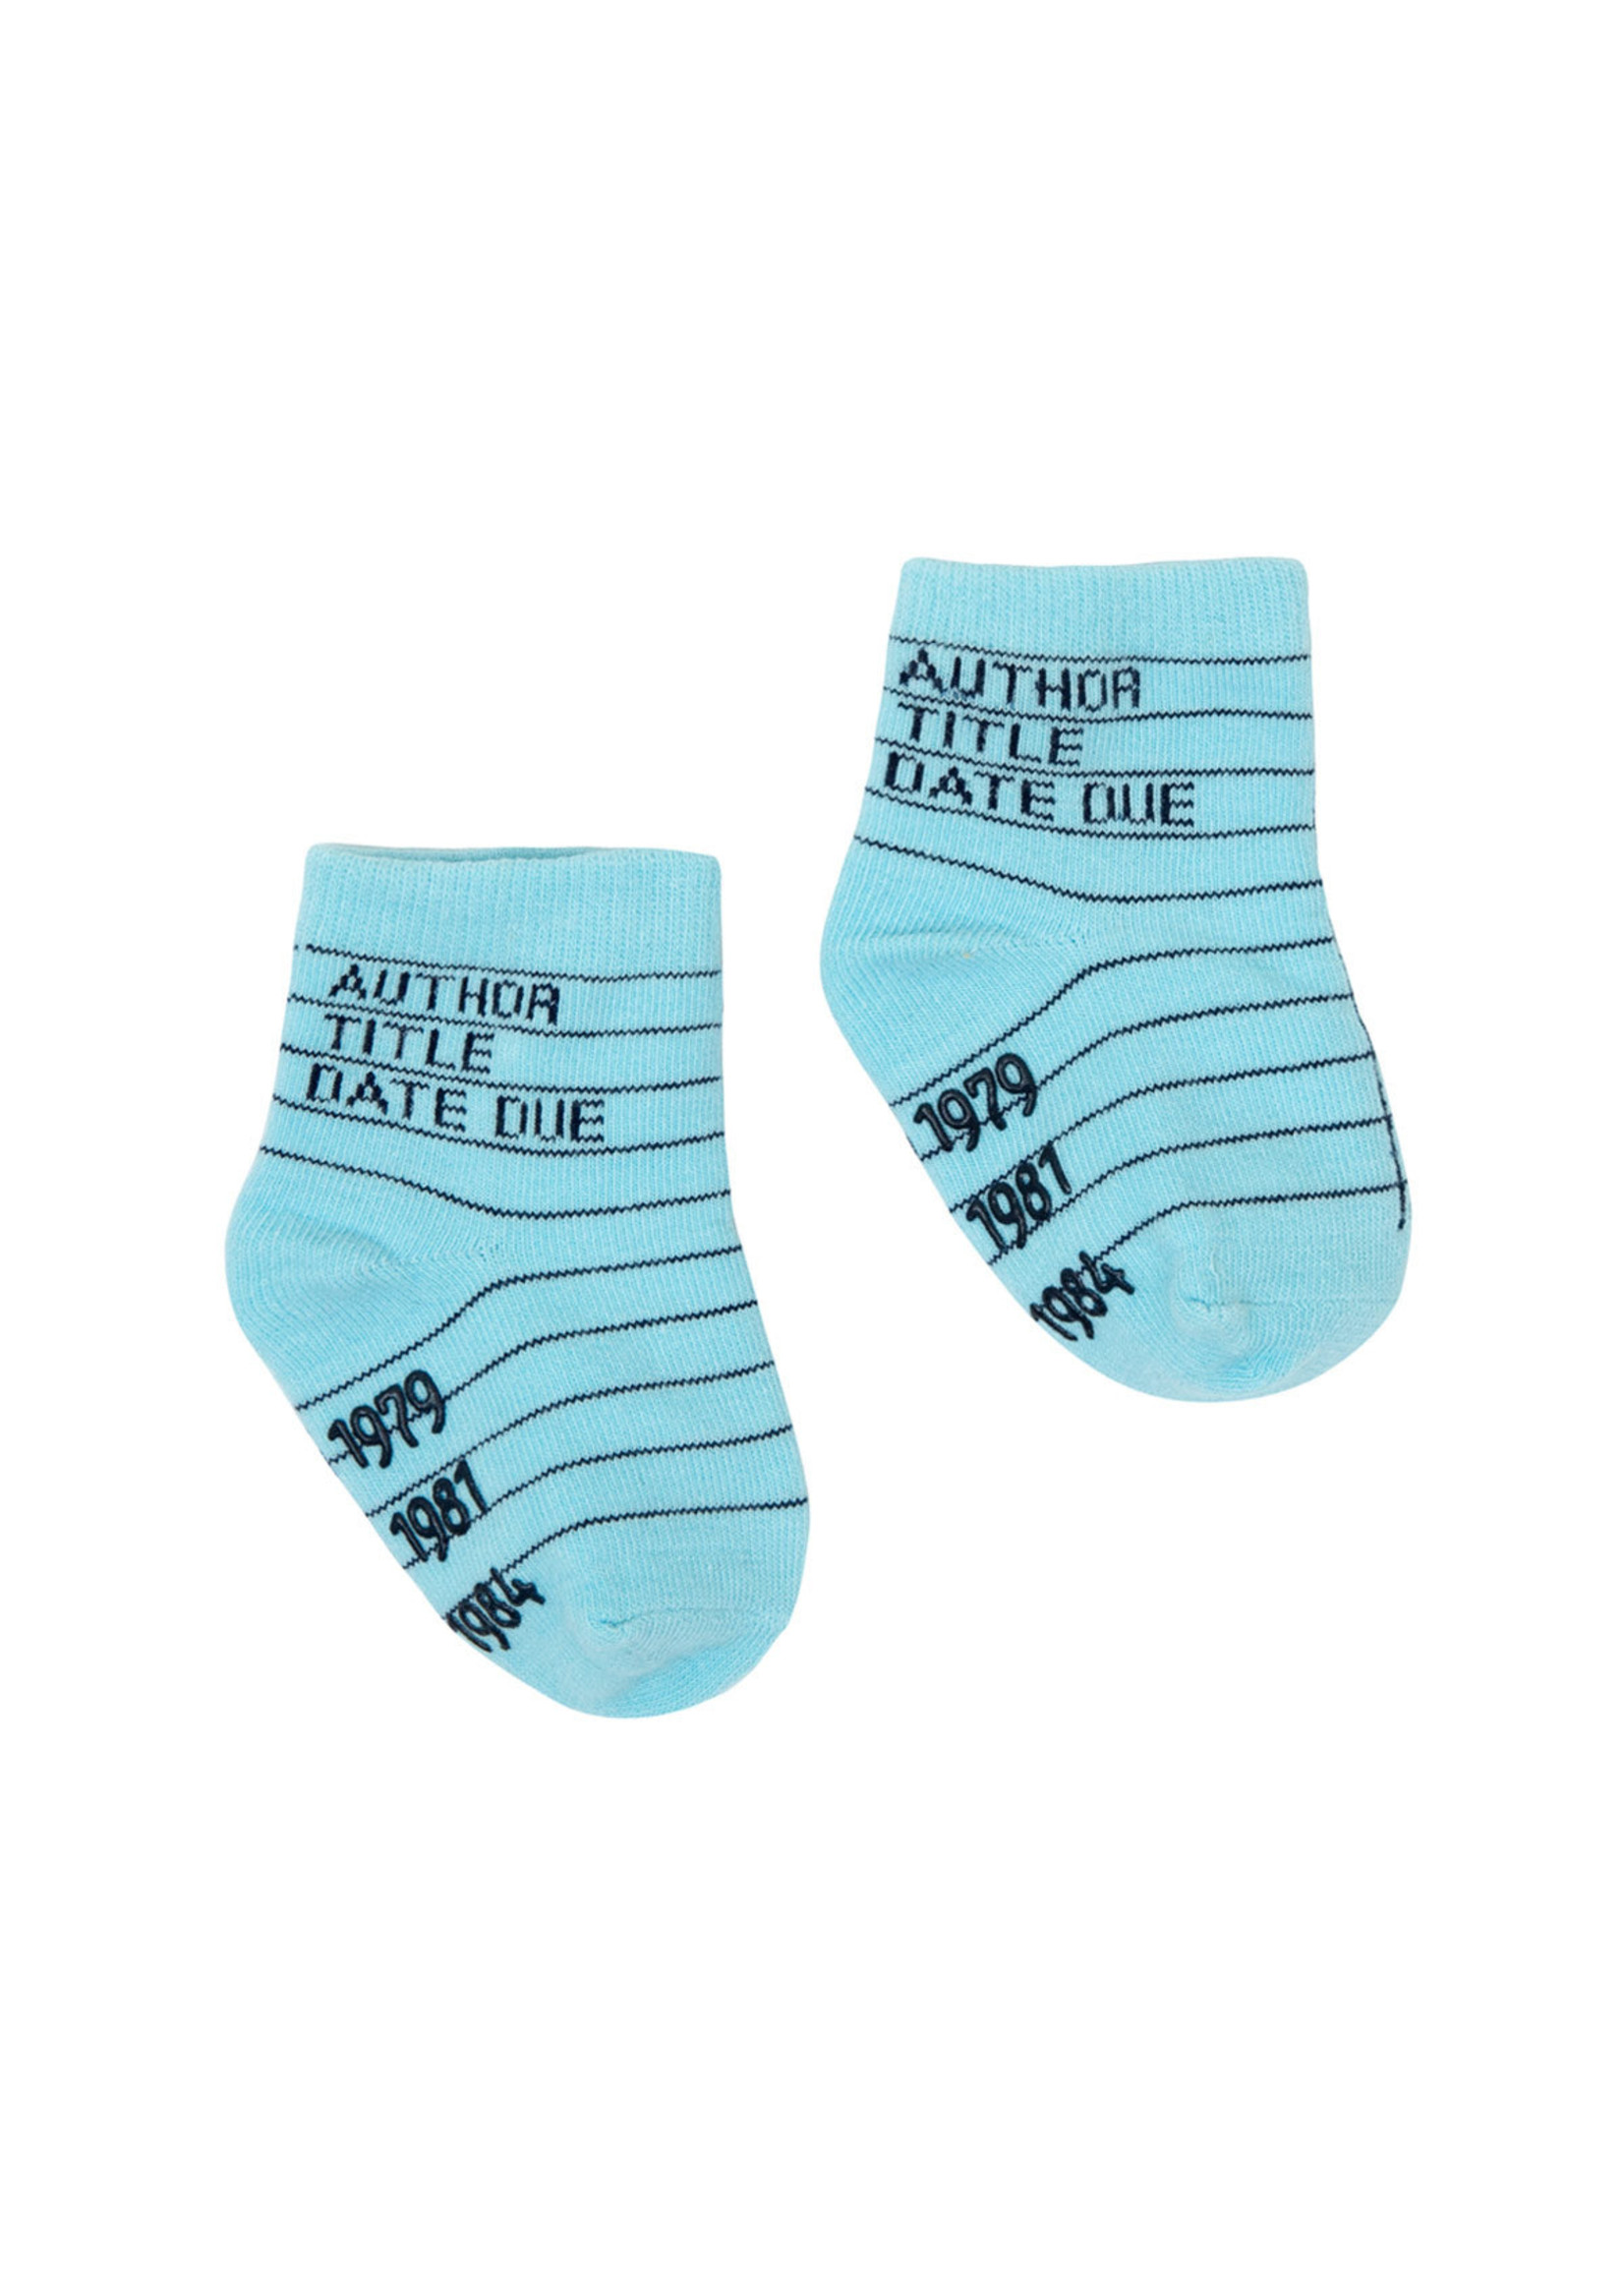 Out of Print Library Card Socks - Kids, Pack of 4